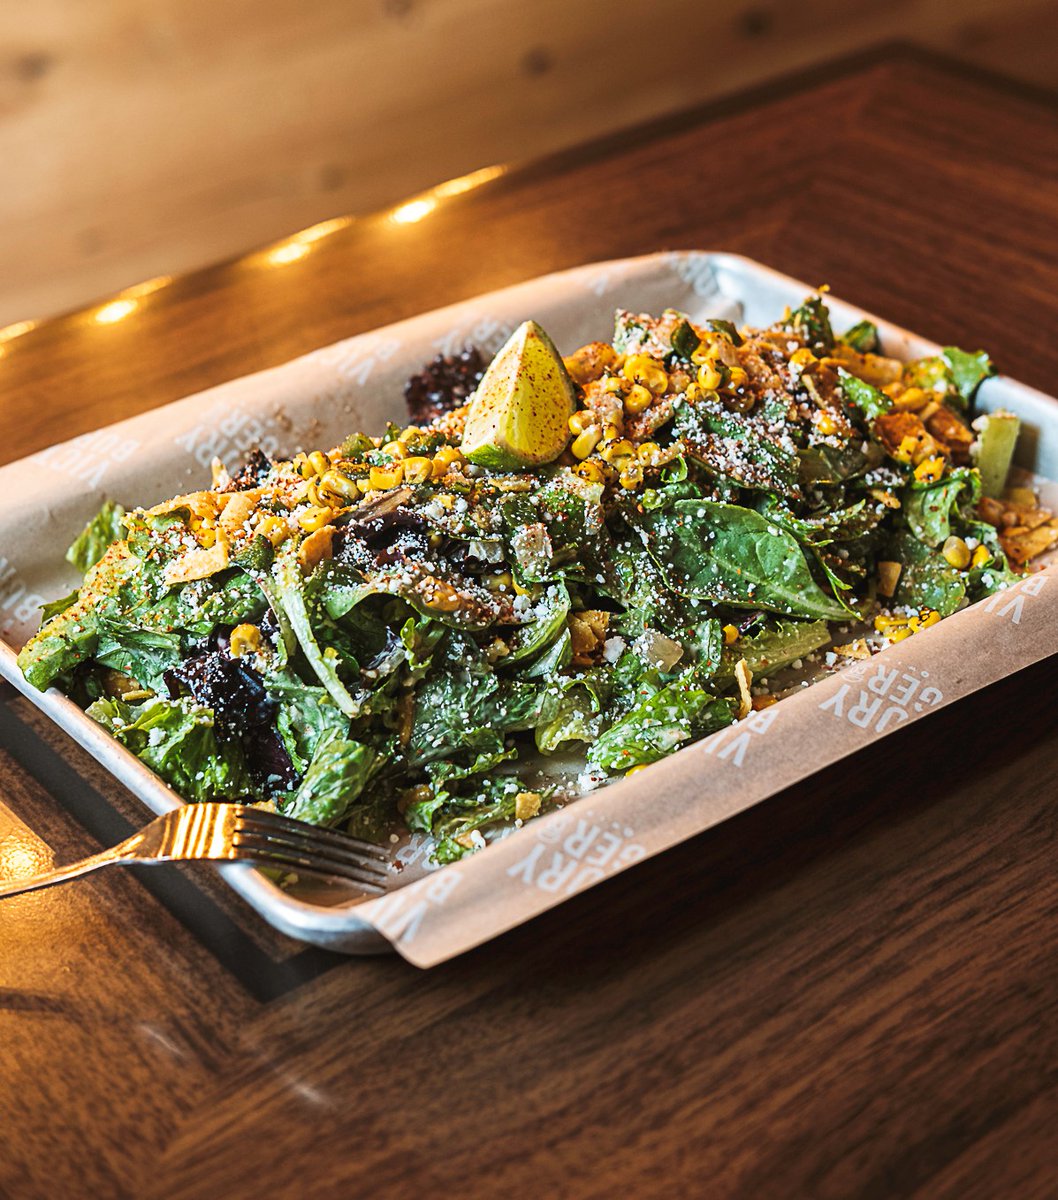 The Victory Loco Salad is a win this summer. Its cool, crisp, and tangy flavors are just what you need this season. 🥗 ☀️ 

Full Menu: circalasvegas.com/drink-dine/vic…

#VictoryBurgerWings #CircaLasVegas #VegasEats #DTLV